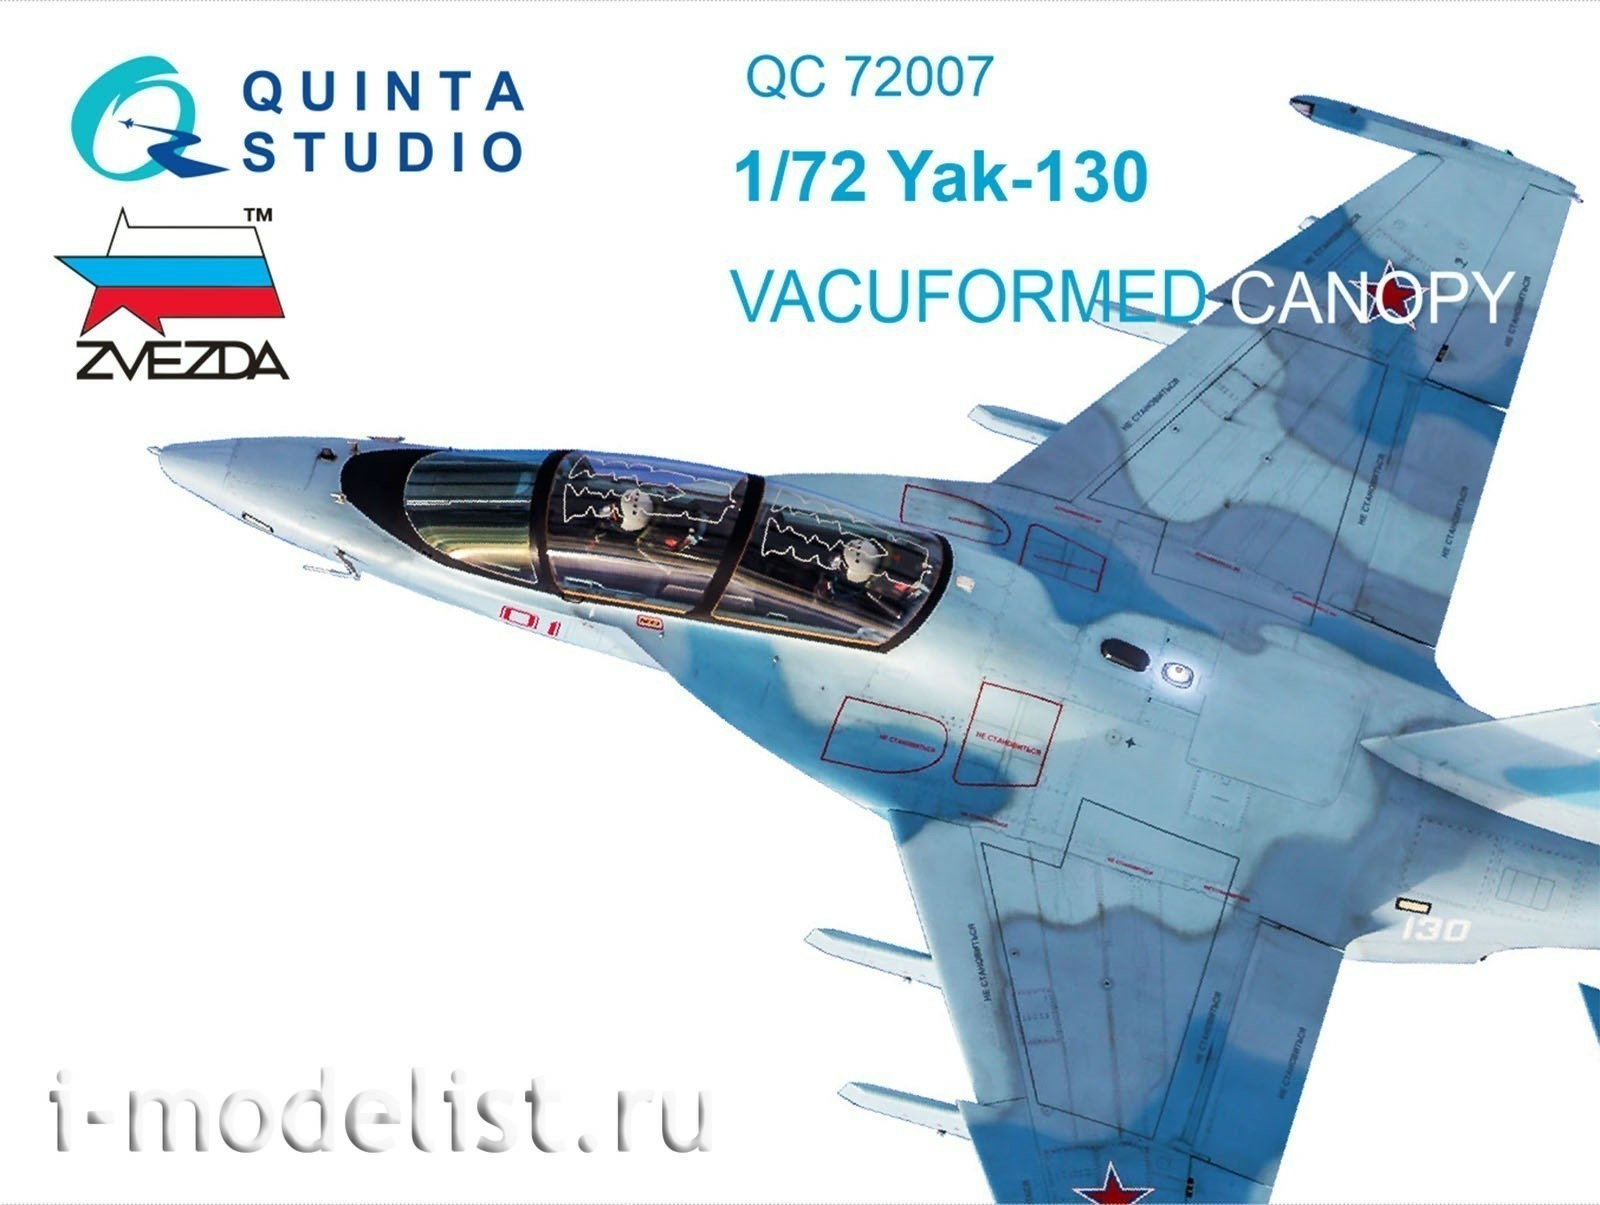 QC72007 Quinta Studio 1/72 set of glazing for the model Yak-130 with children.cord (for the Zvezda company model)